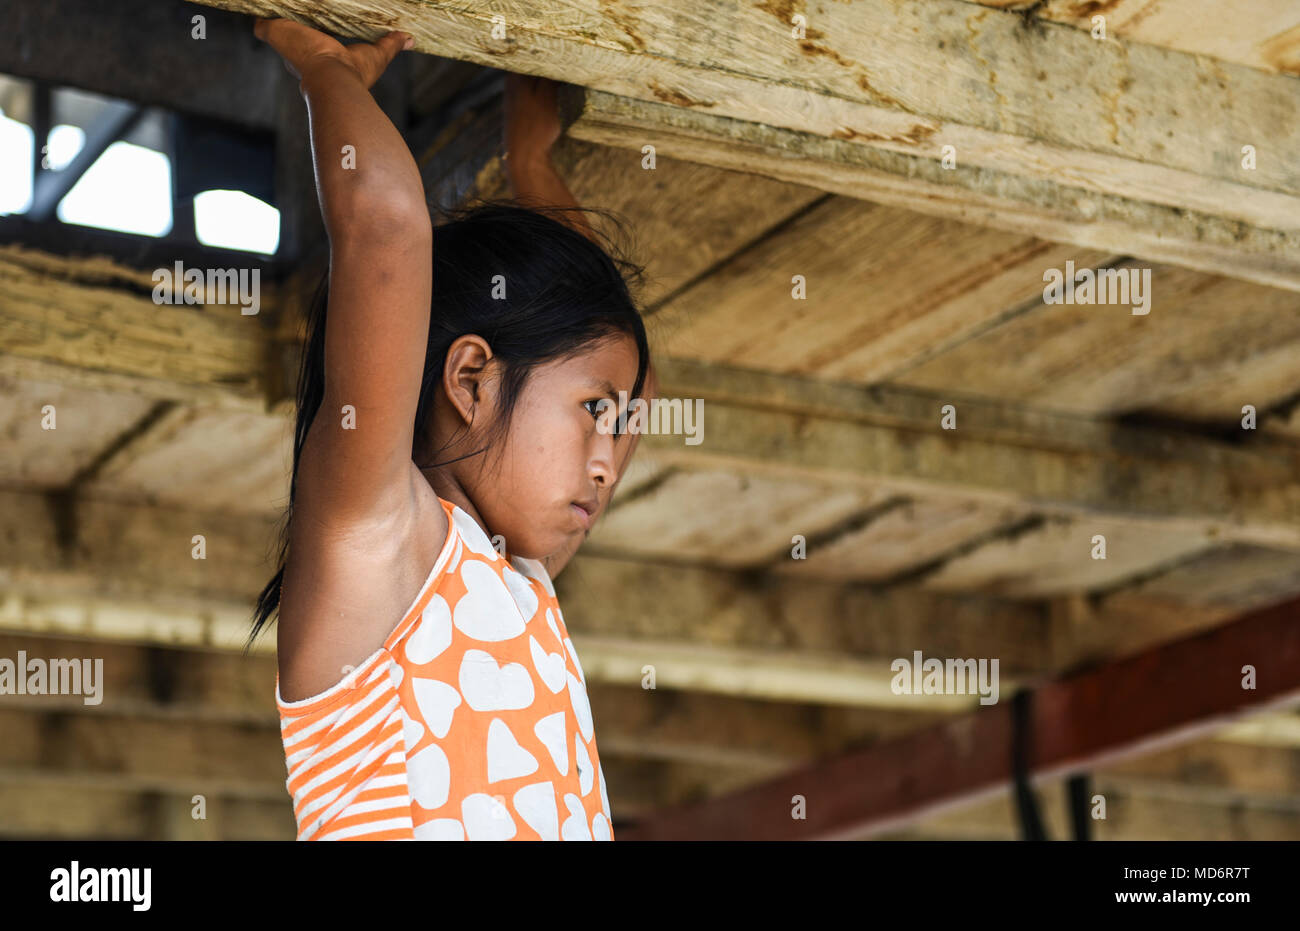 A child in the Cémaco Province, Panama, holds on to a raised floor March 28, 2018, during Exercise New Horizons 2018. Exercise New Horizons is a joint training exercise where all branches of the U.S. military conduct training in civil engineer, medical and support services while benefiting the local community. The exercise will assist children throughout the region by providing medical assistance and facilities such as schools, a youth community center and a women’s health ward. (U.S. Air Force photo by Senior Airman Dustin Mullen/Released) Stock Photo